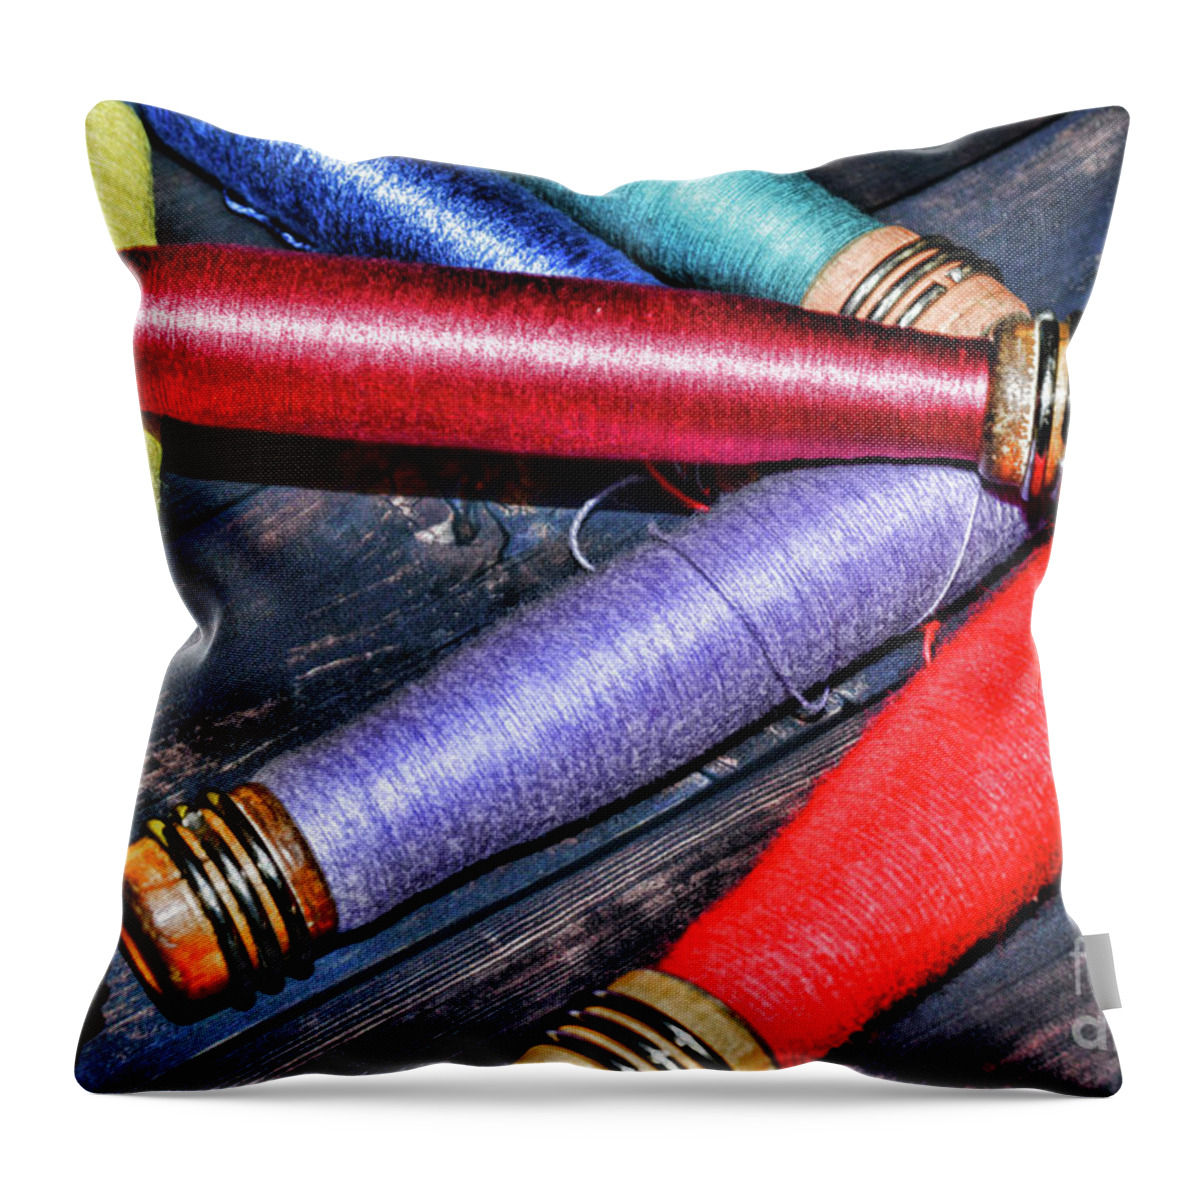 Paul Ward Throw Pillow featuring the photograph Vintage Industrial Sewing Spools by Paul Ward